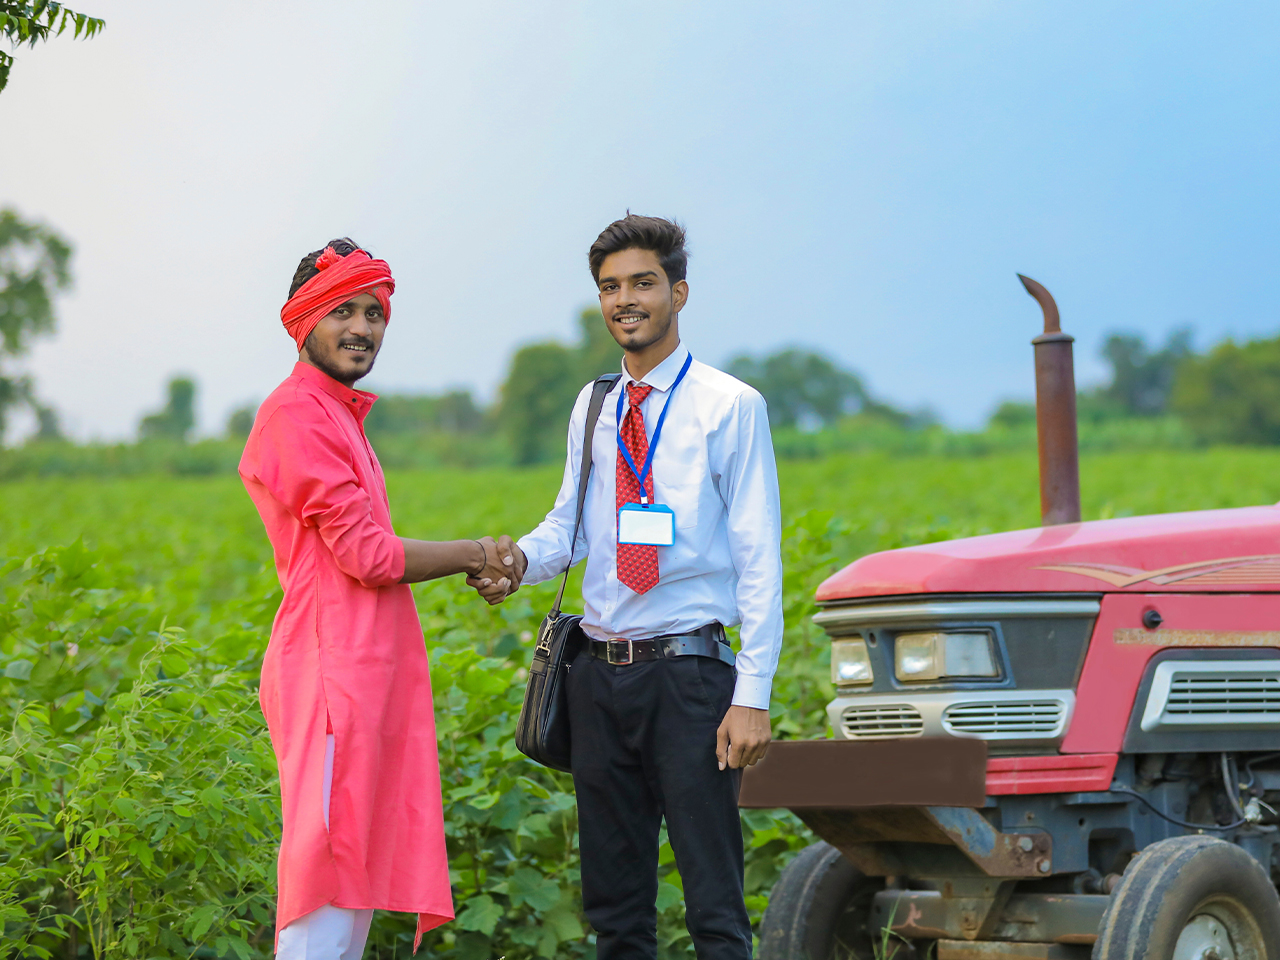 mba in rural management